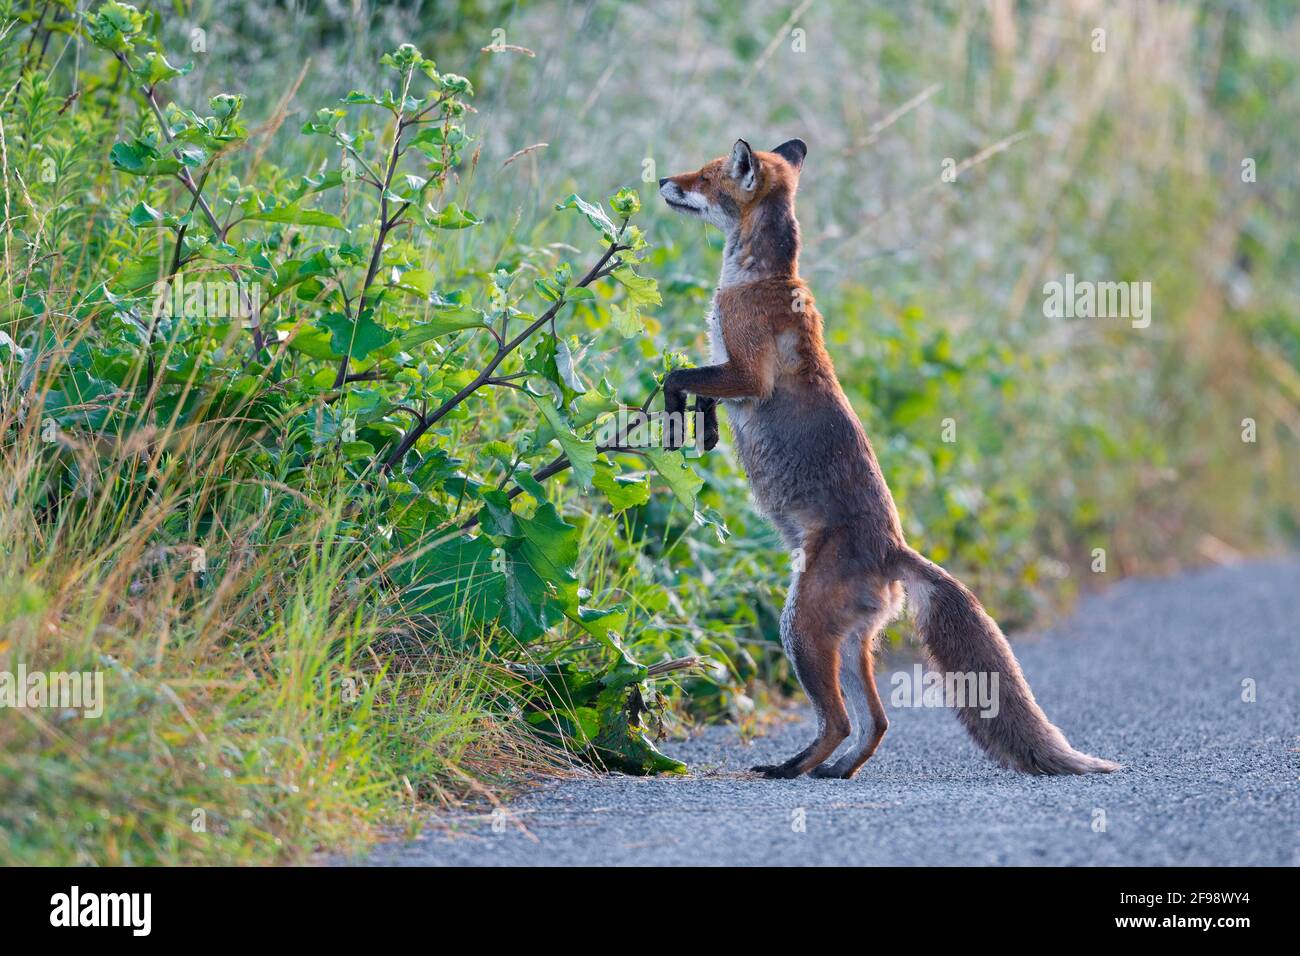 Red fox (Vulpes vulpes) sniffs a thistle, June, Hesse, Germany Stock Photo